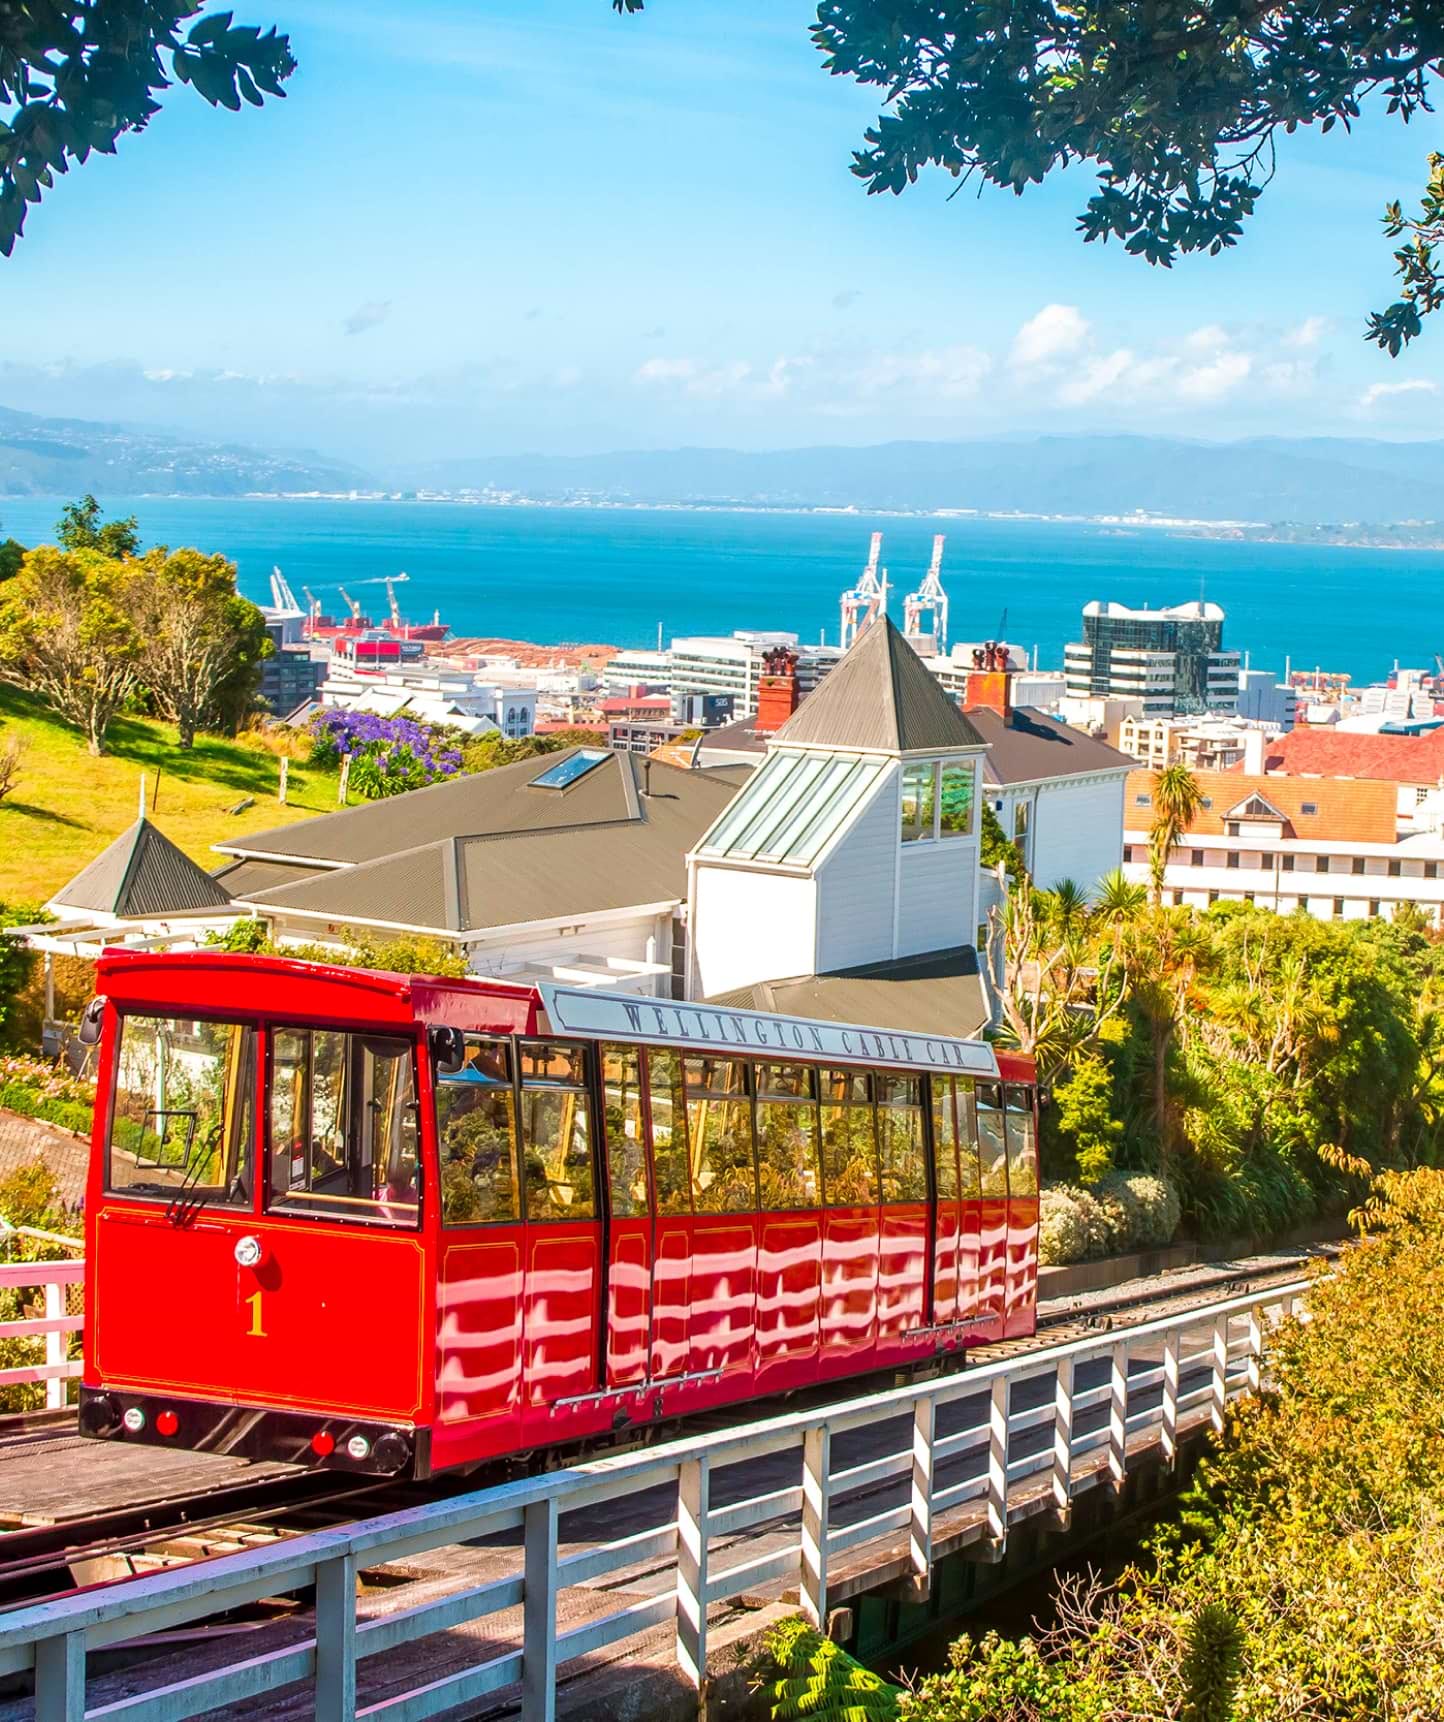 New-Zealand Fjords and Australia Shores - Red cable car and city behind